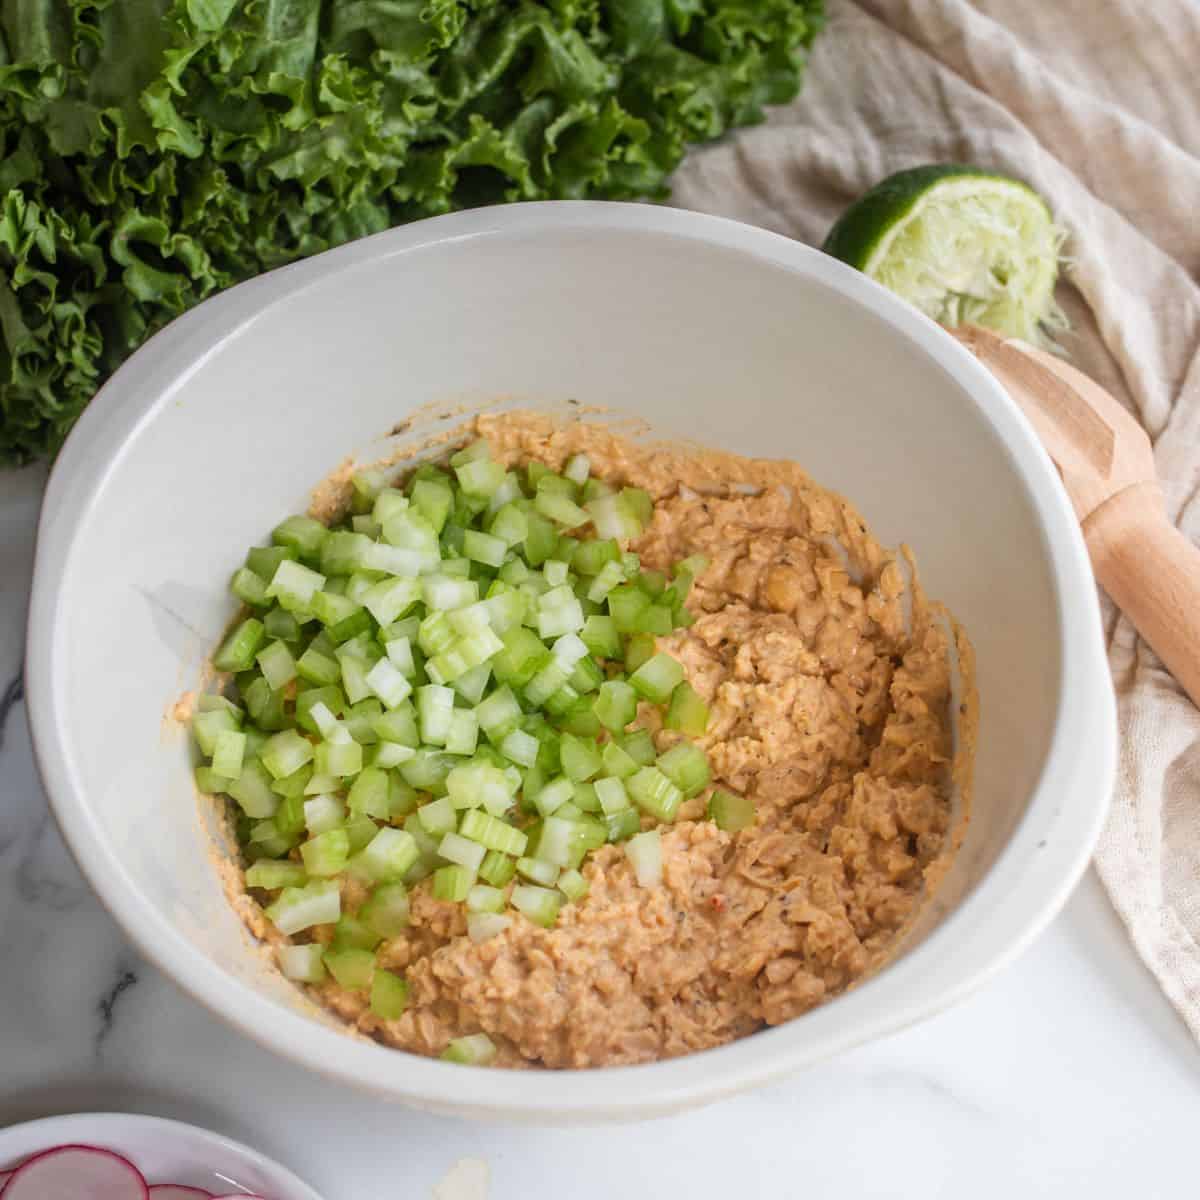 Chickpea mixture with cut celery on top in a mixing bowl.